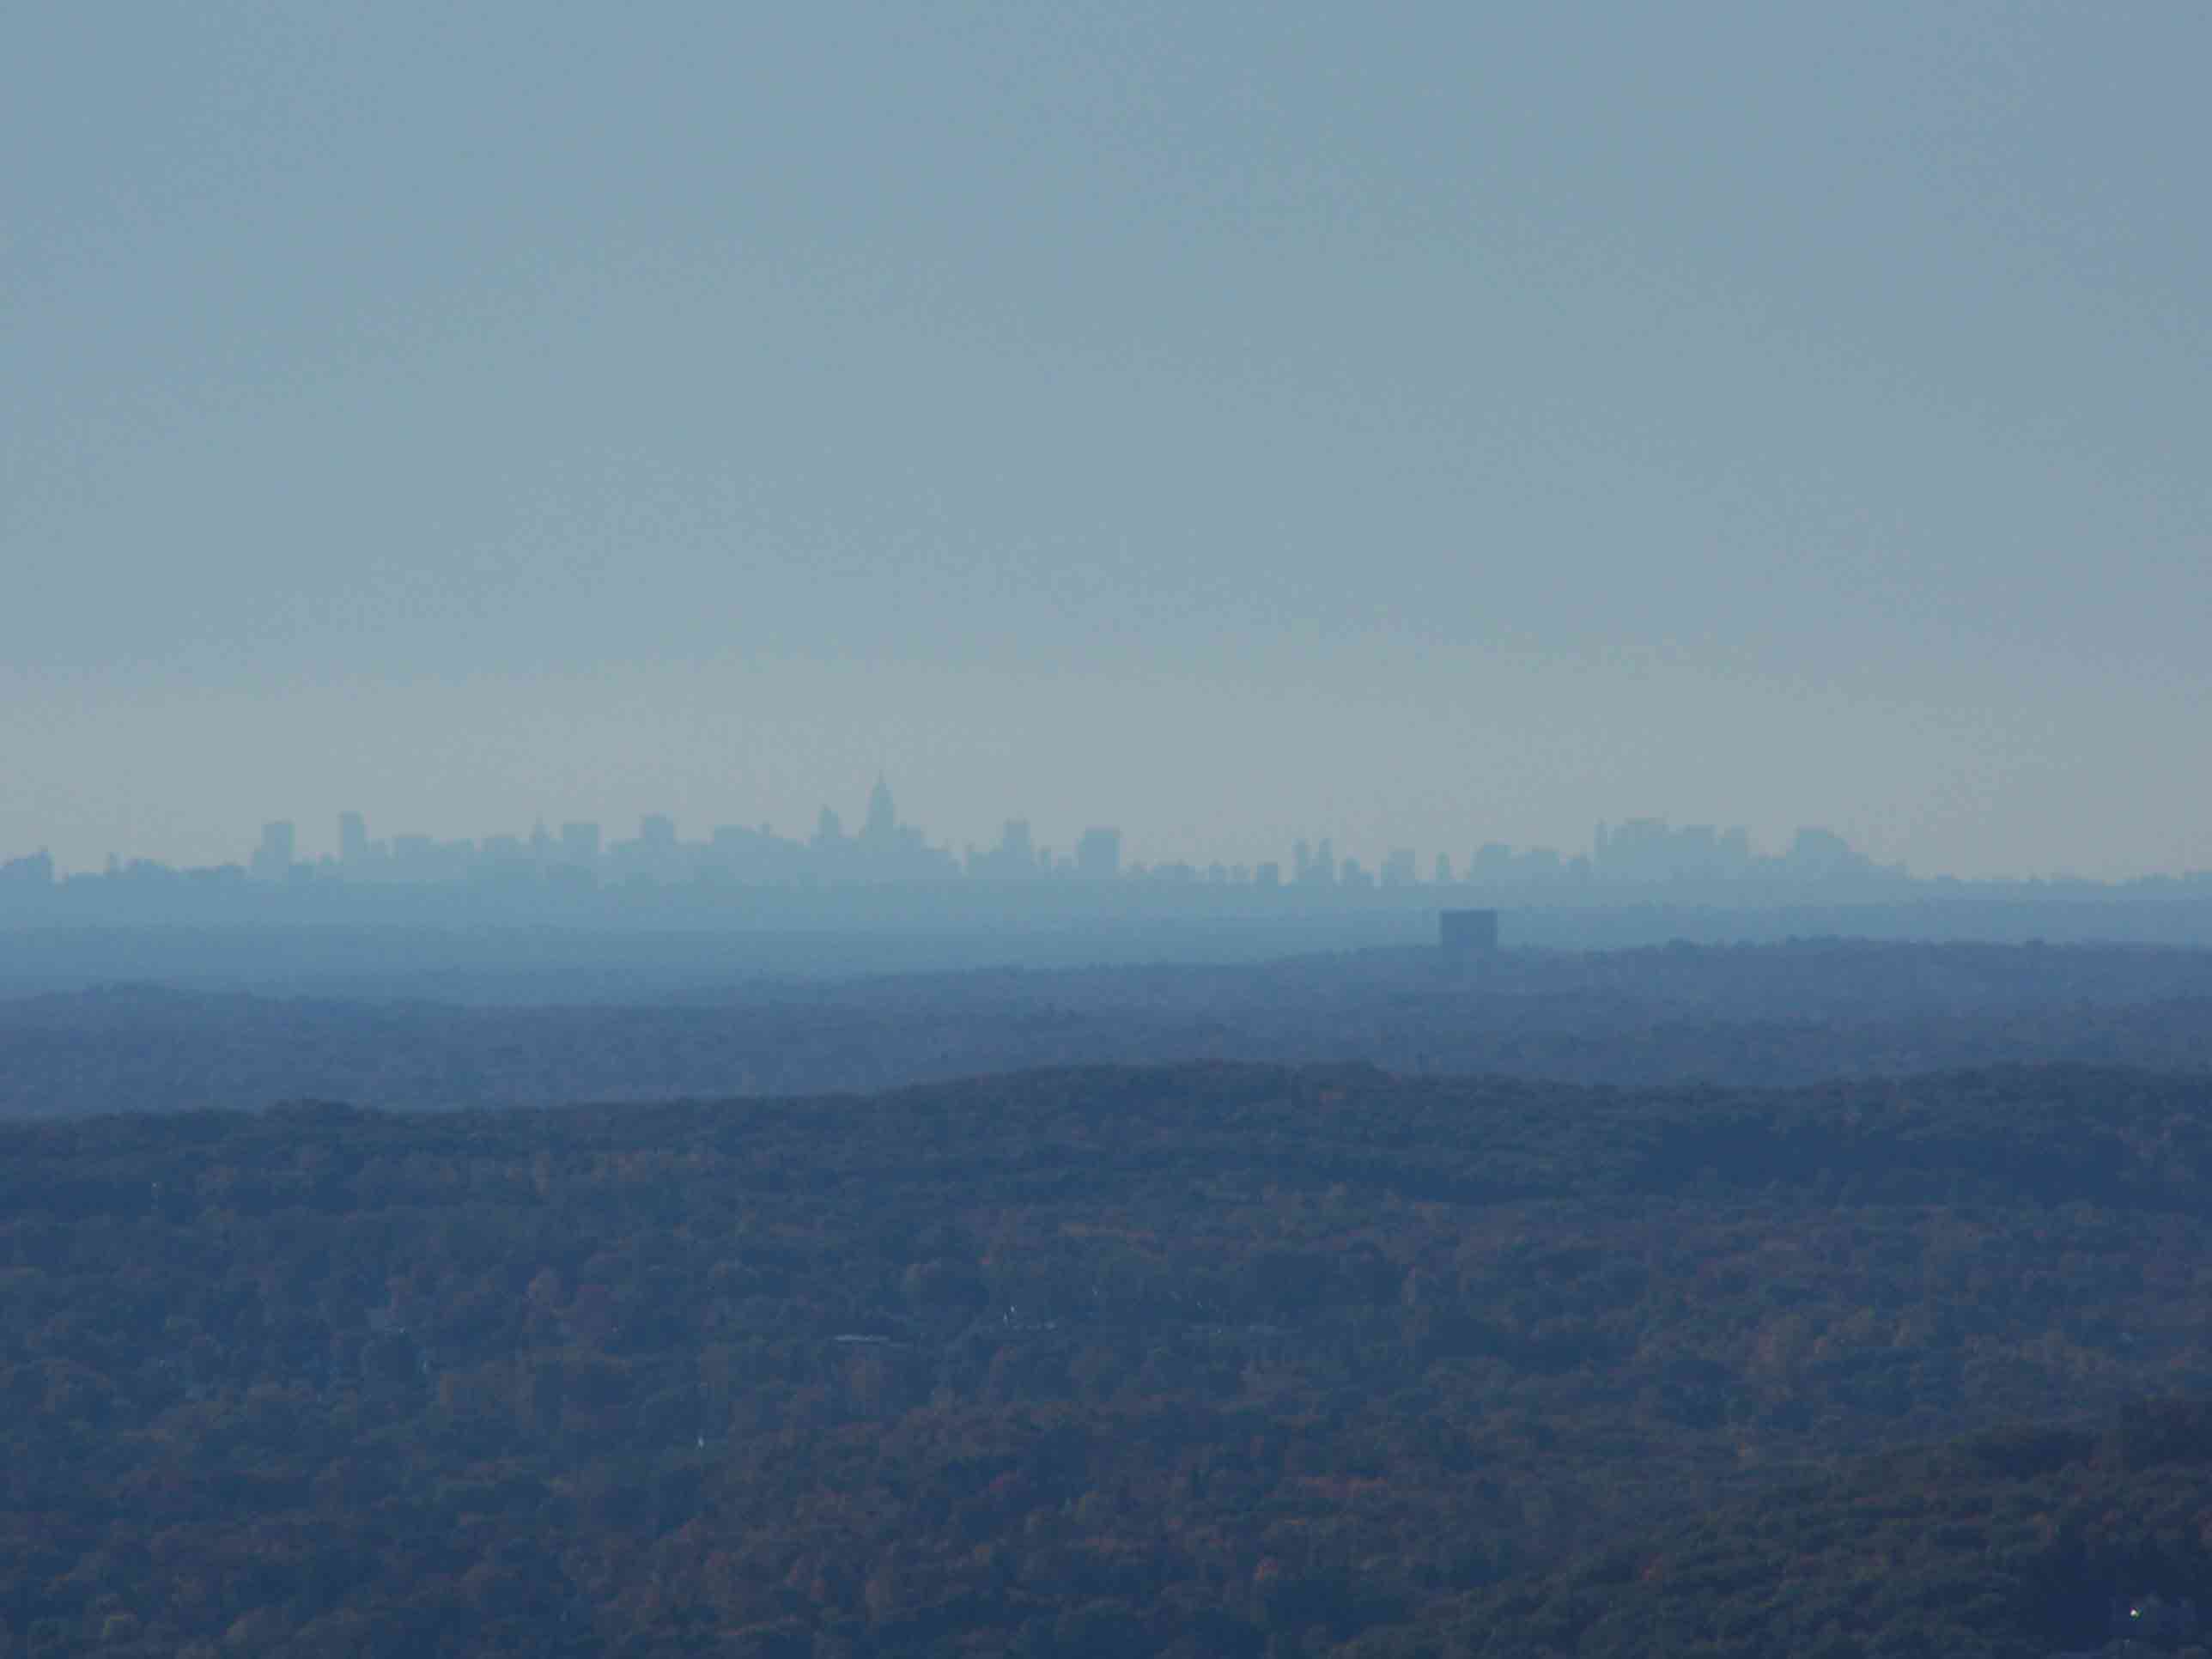 mm 6.8 View of New York City skyline from West Mountain shelter. Courtesy at@rohland.org